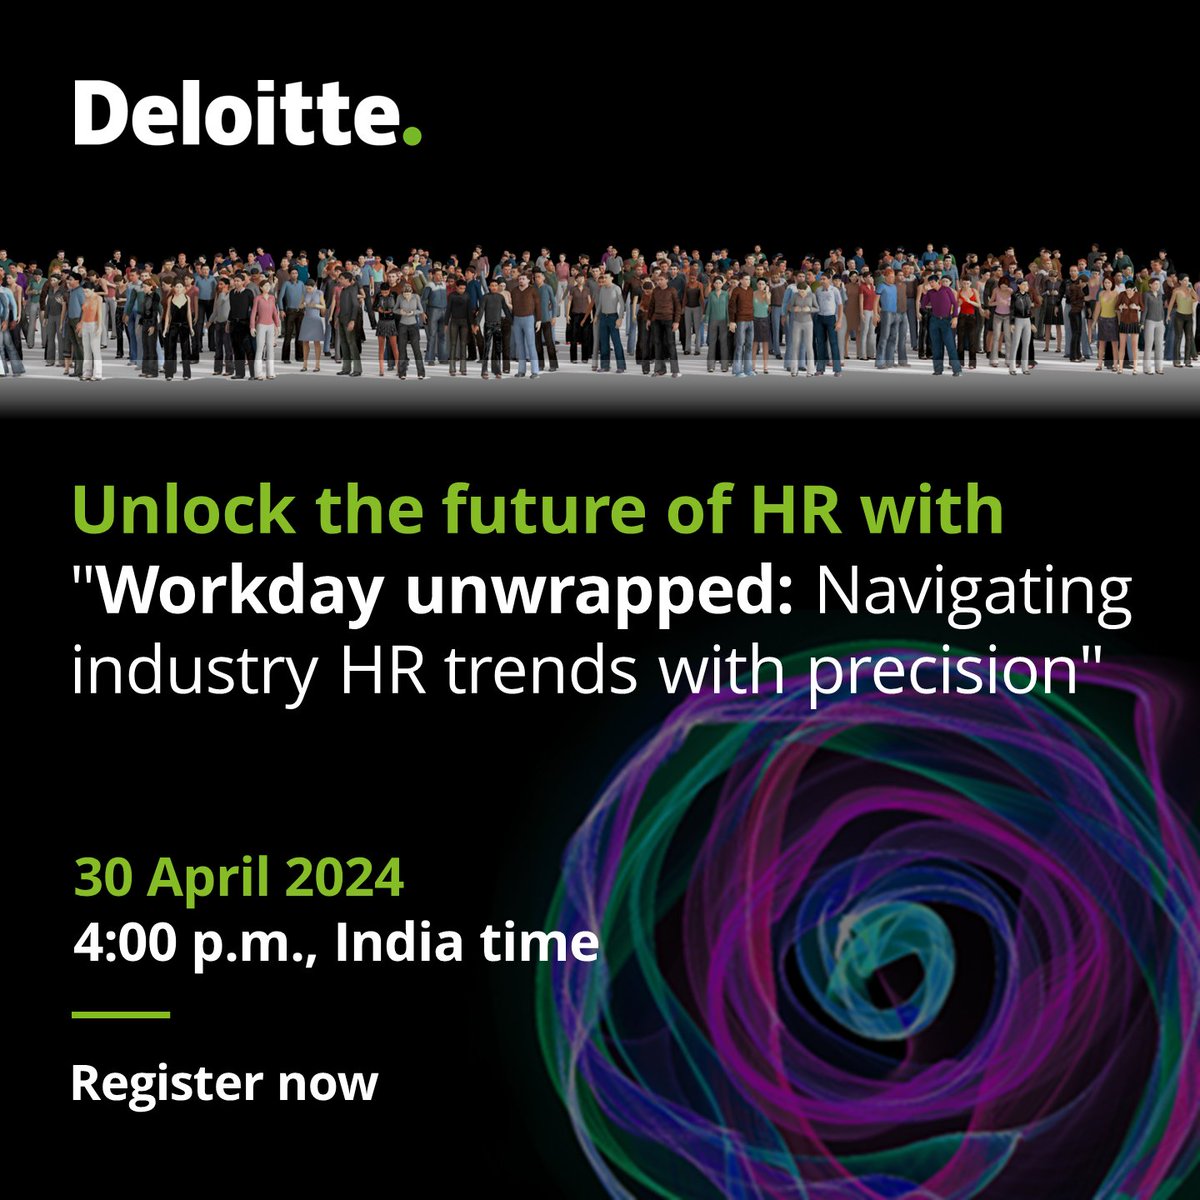 Save the date for our HR eminence session. Dive deep into the latest HR trends and explore Workday's innovative features in the latest release. 
Register now to secure your spot: deloi.tt/3UhQxFk

#HR #FutureOfHR #WorkdayUnwrapped #HRtrends